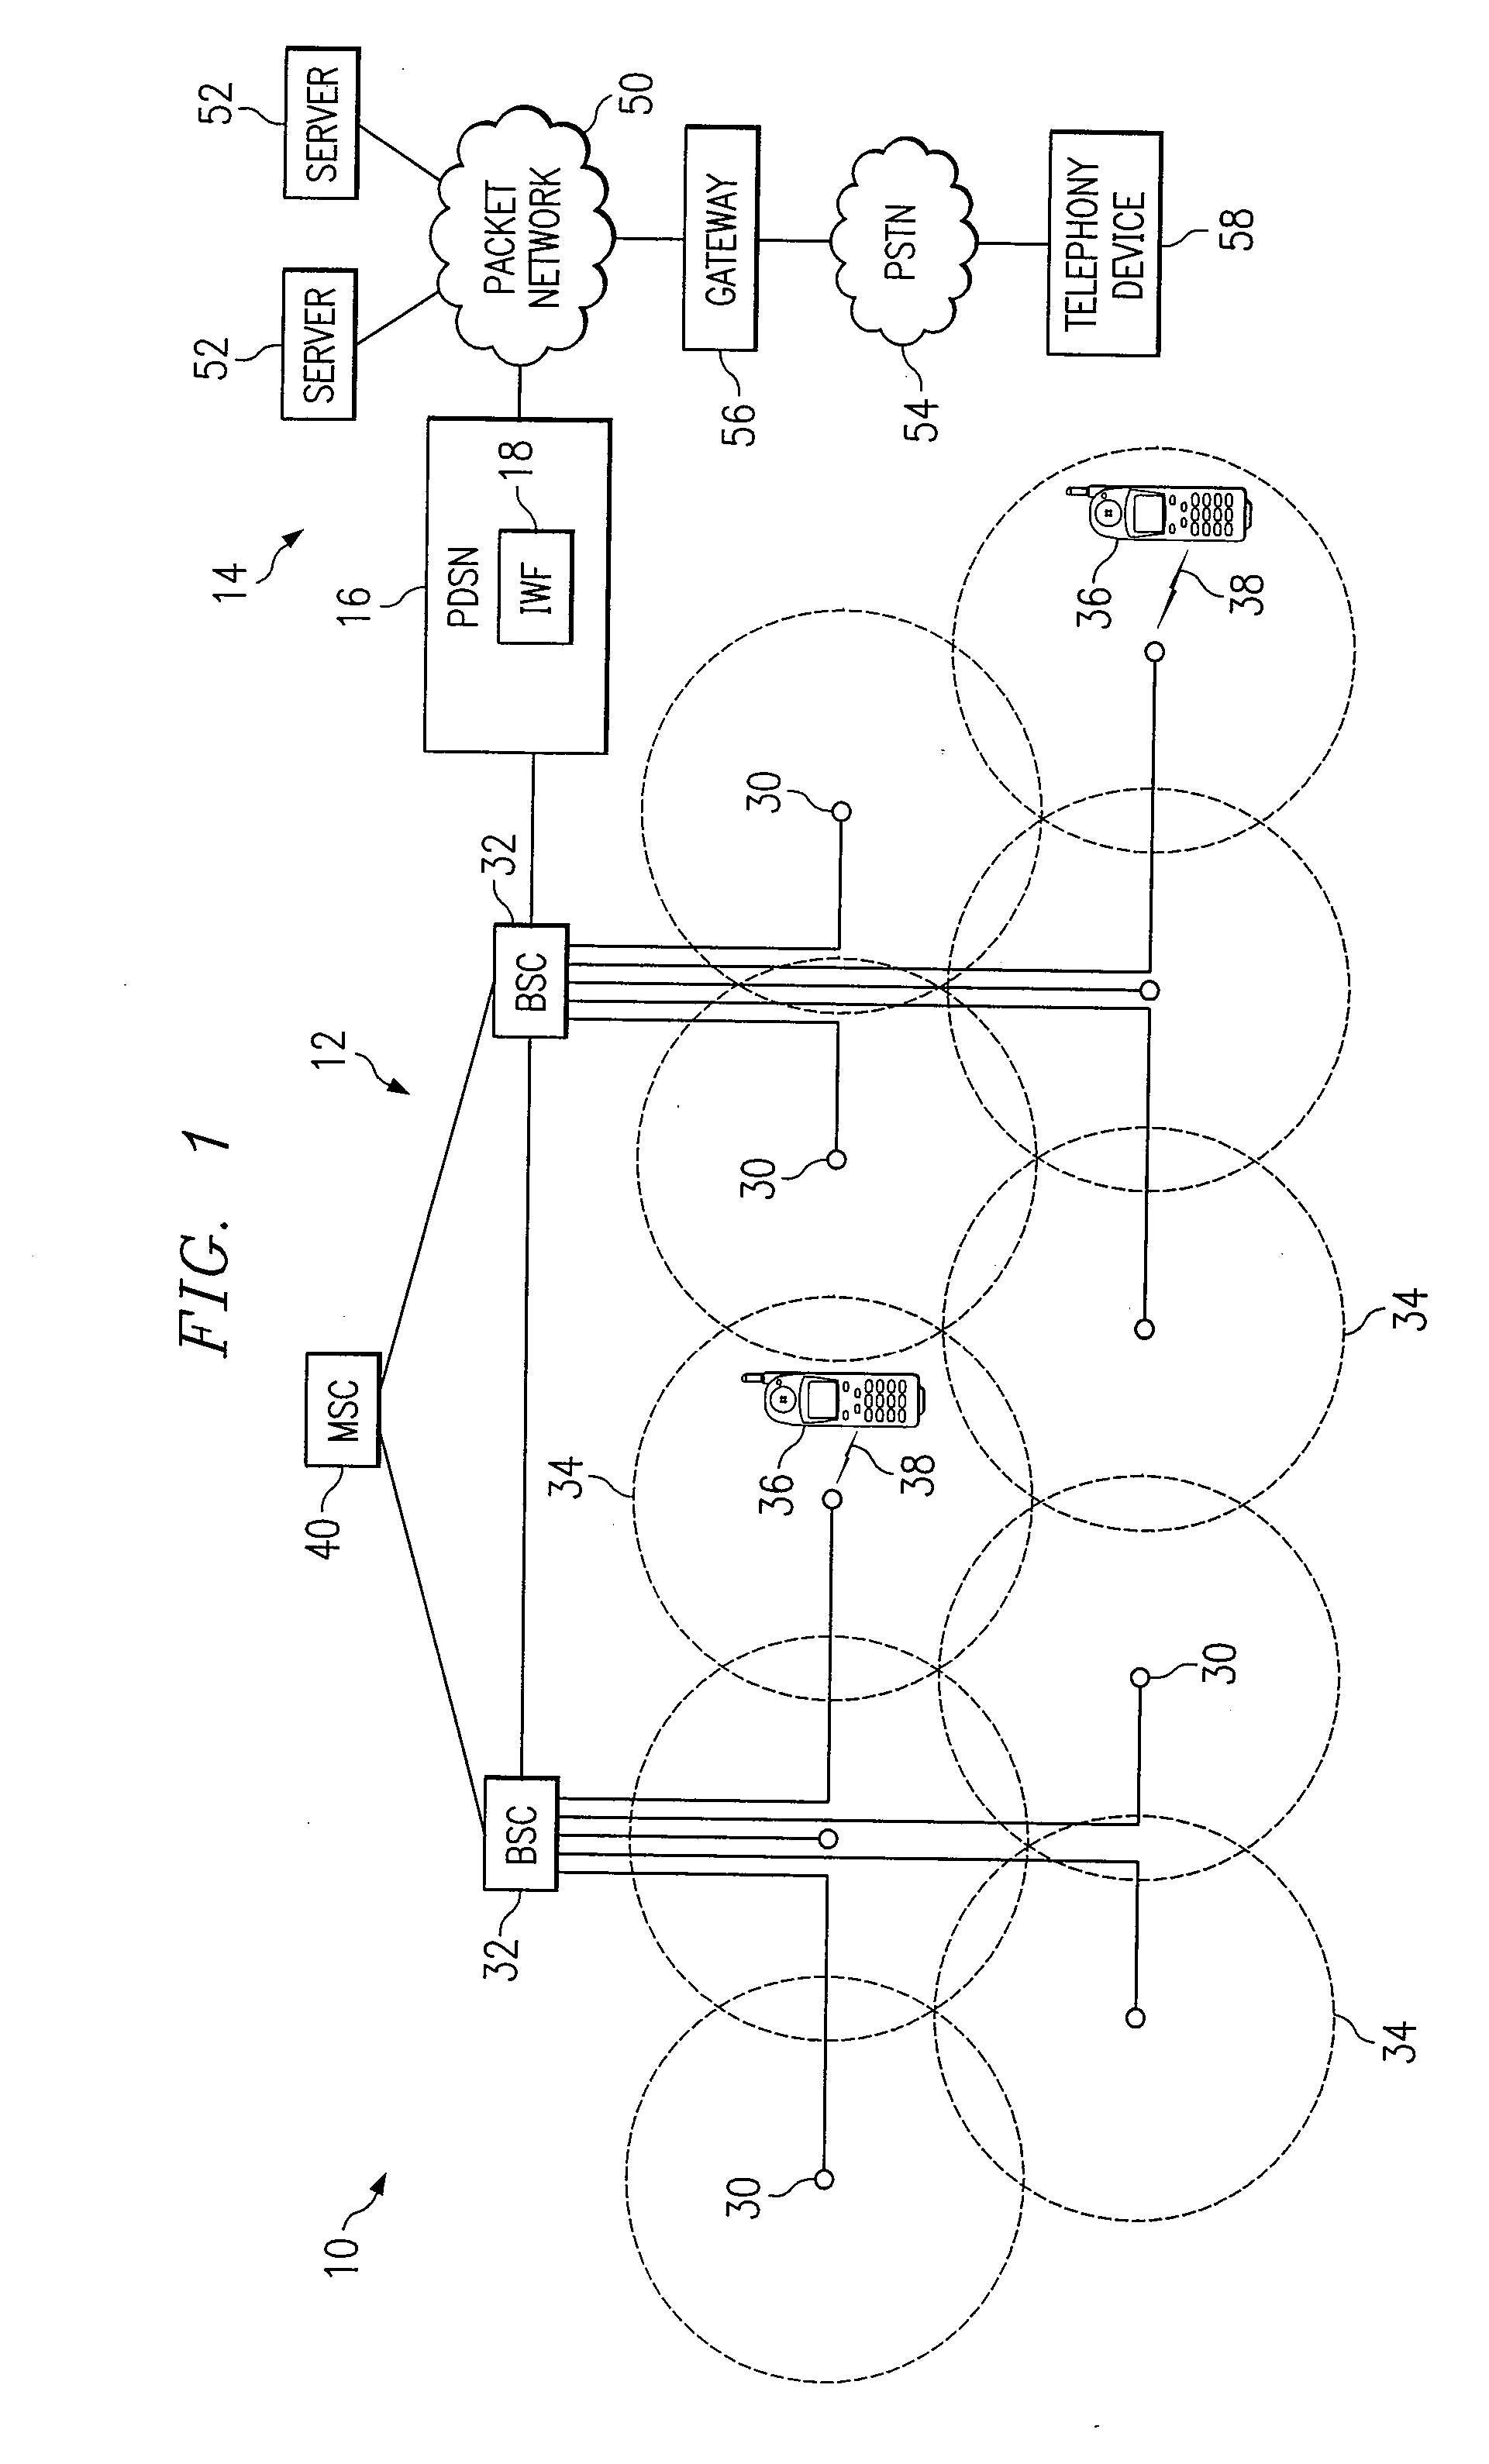 Method and System for Detecting a Preferred Wireless Network for a Mobile Device